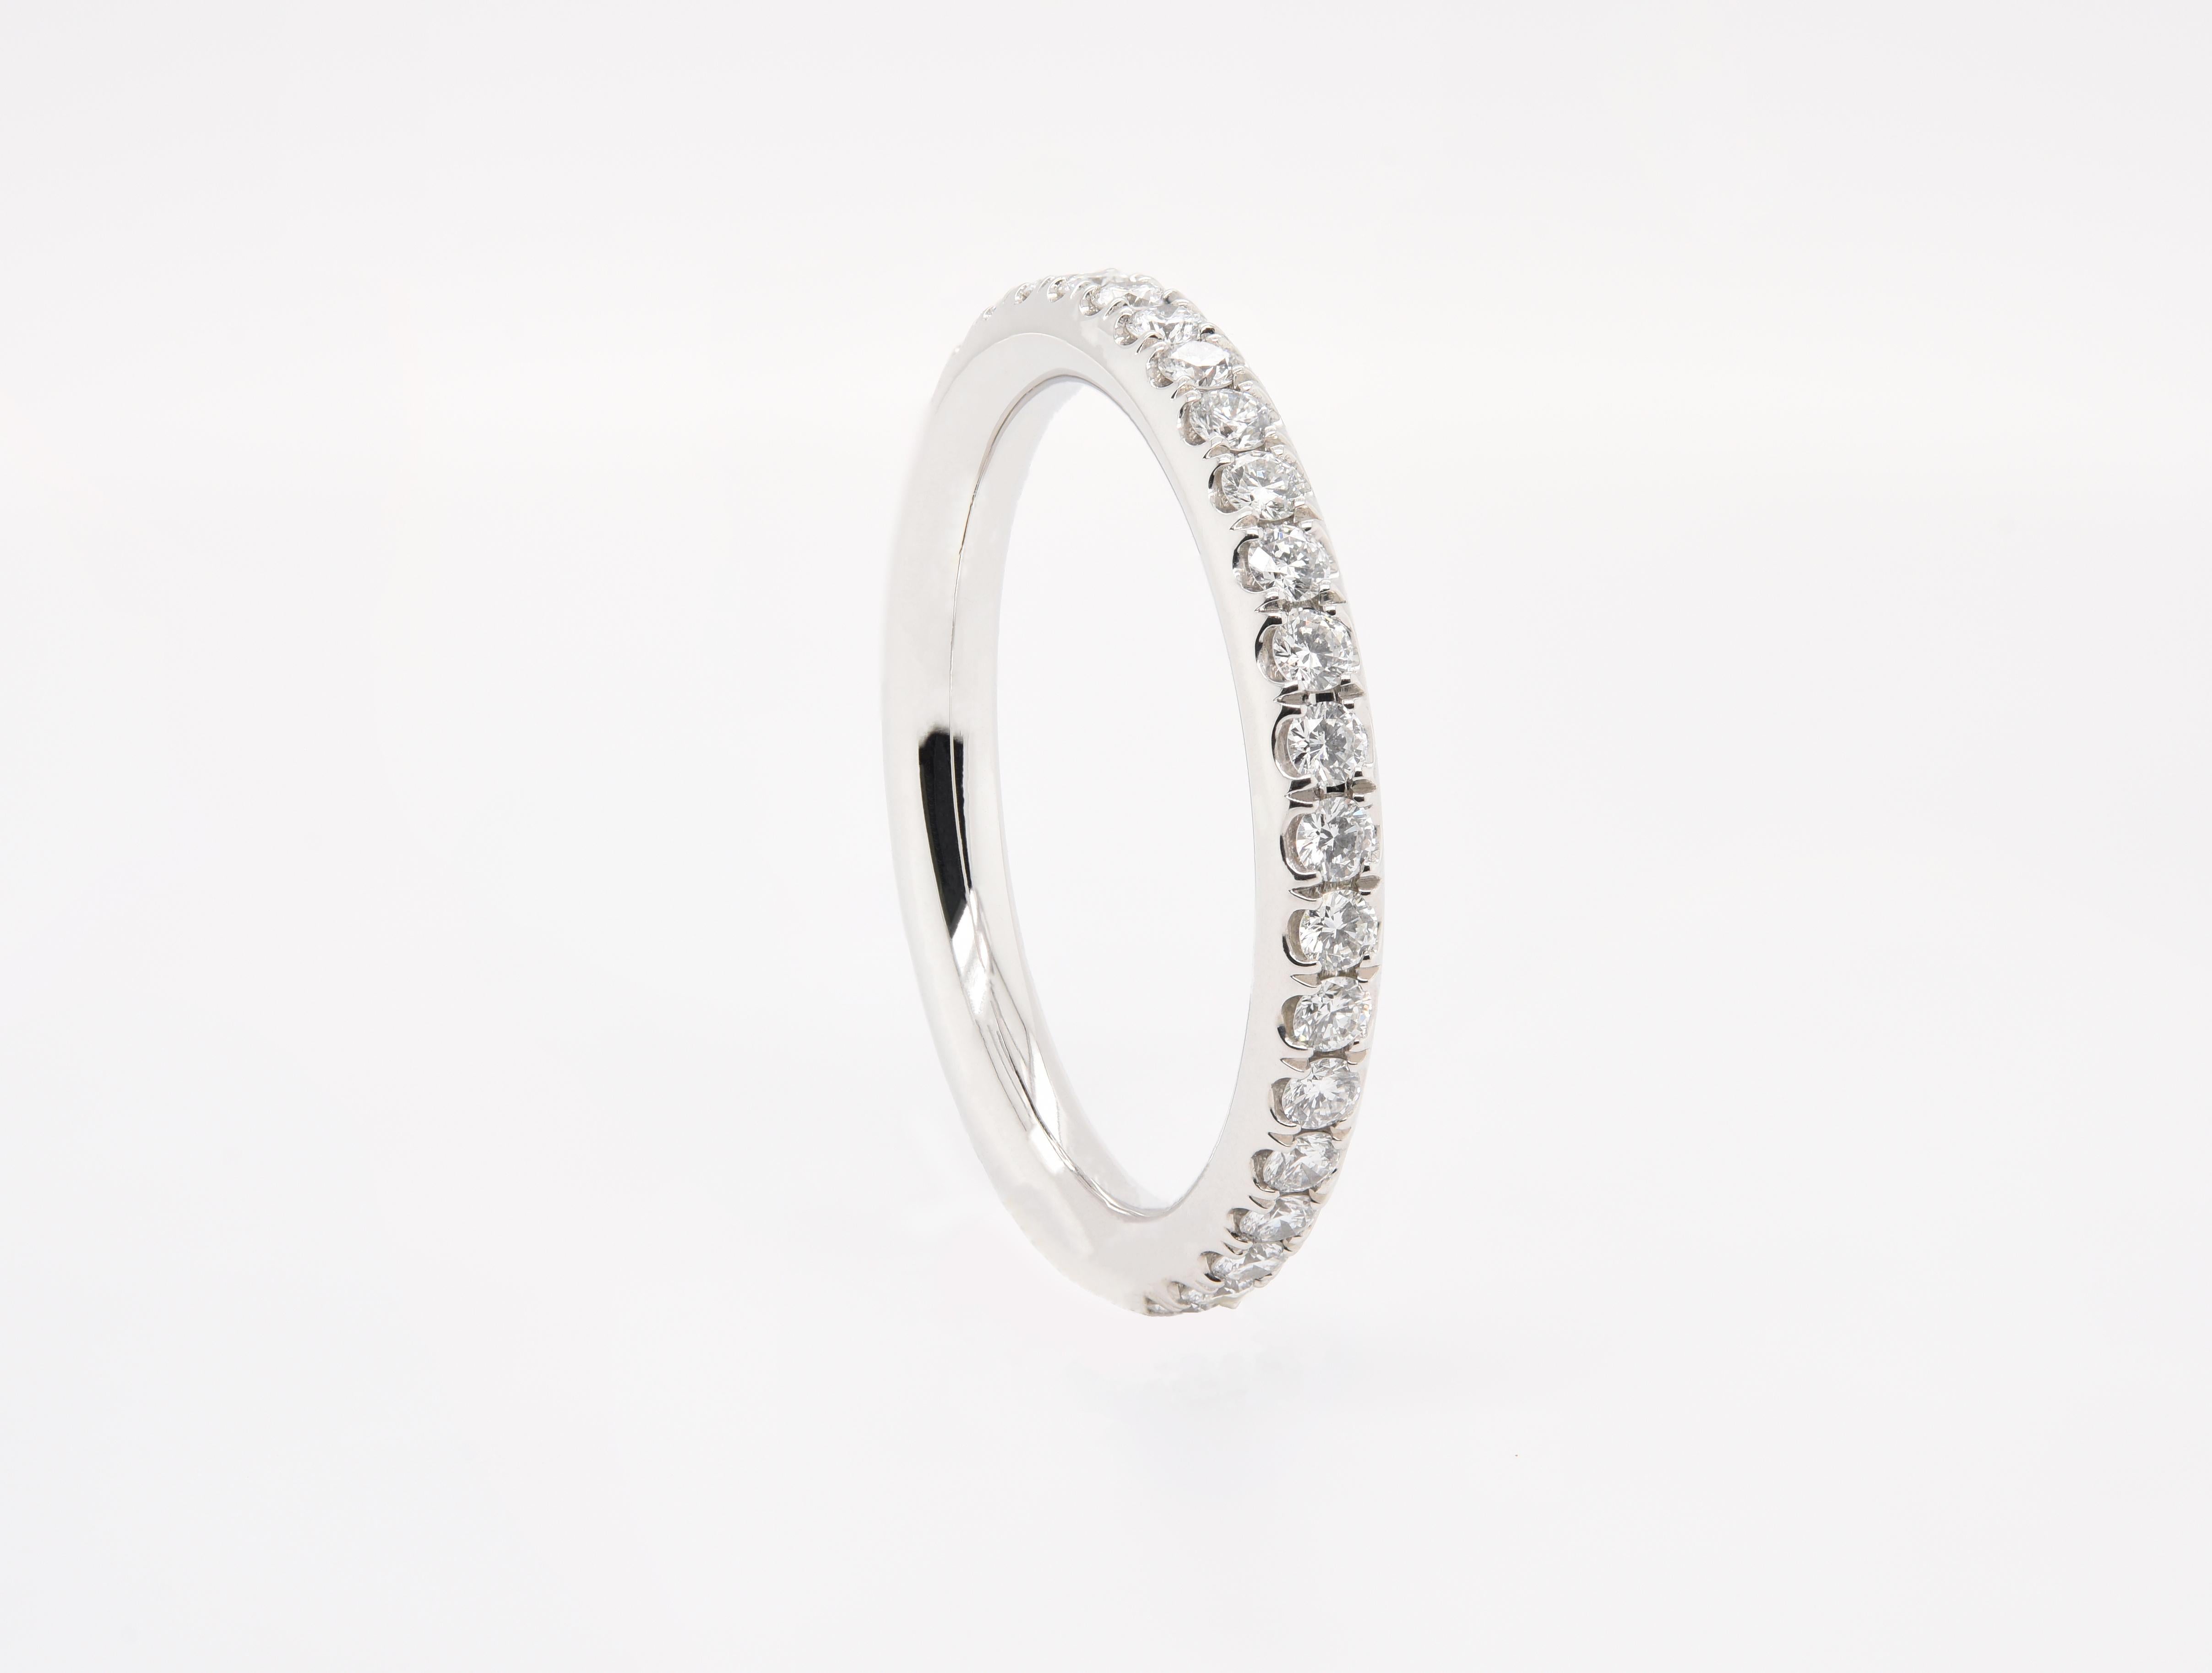 JAG New York Eternity Bands are rings that have the gemstones all the way around the ring. Each ring is custom made to your finger size and you get to pick the gemstones you want. These are truly a way to create your one of a kind ring that allows